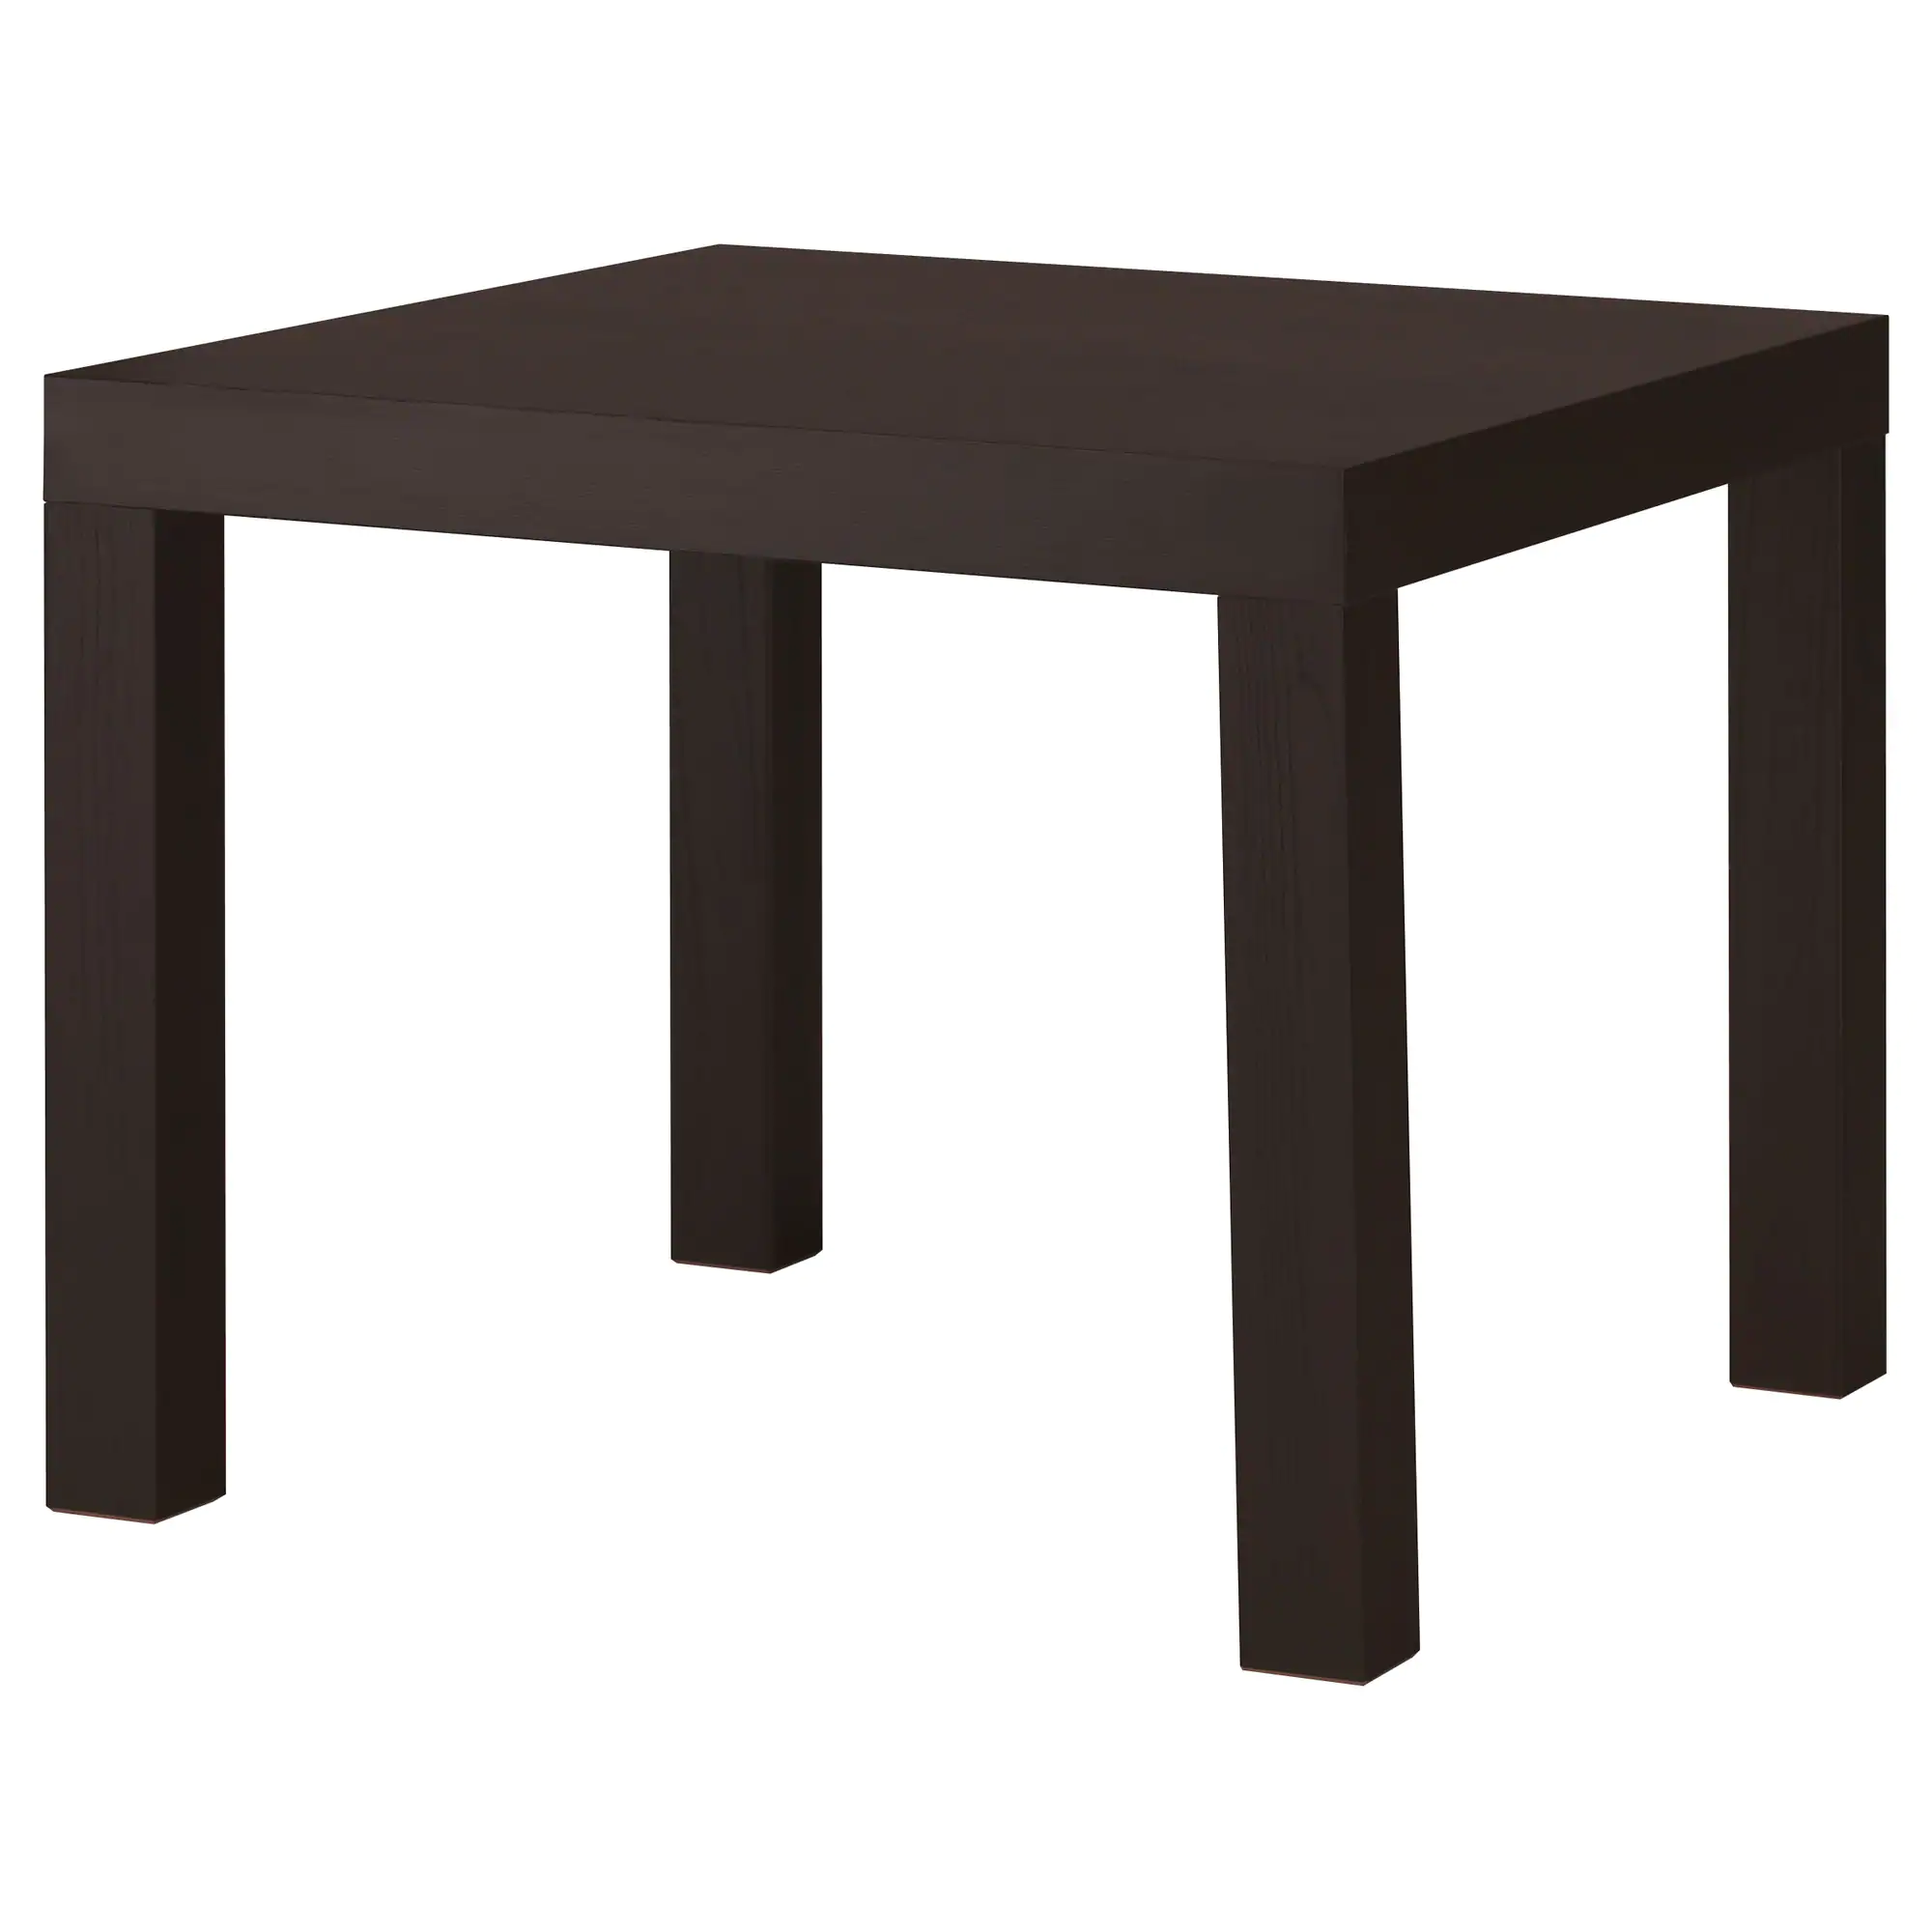 tablecloth the outrageous awesome log style end tables lack side table black ikea skirts queen fox theater detroit metal glass solid wood chairs chase furniture target mirrored